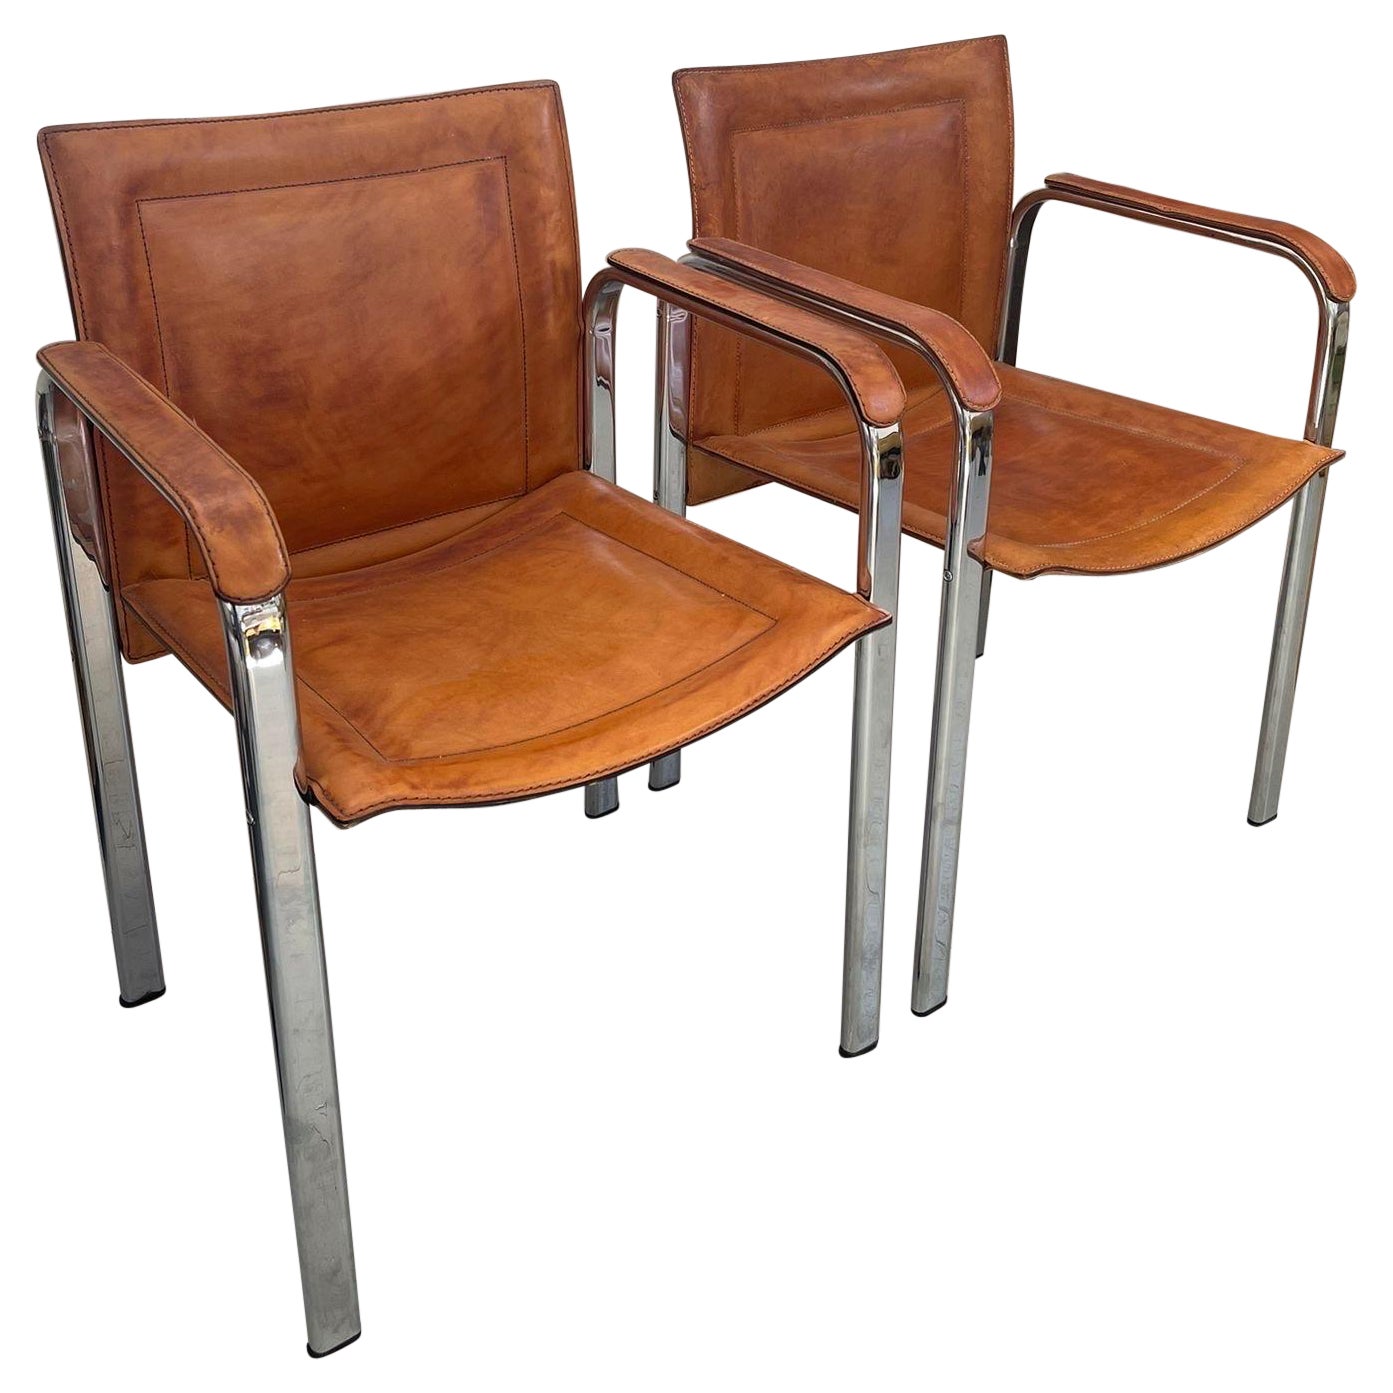 Swedish Mid Century Modern Leather Chairs. Set of Two For Sale